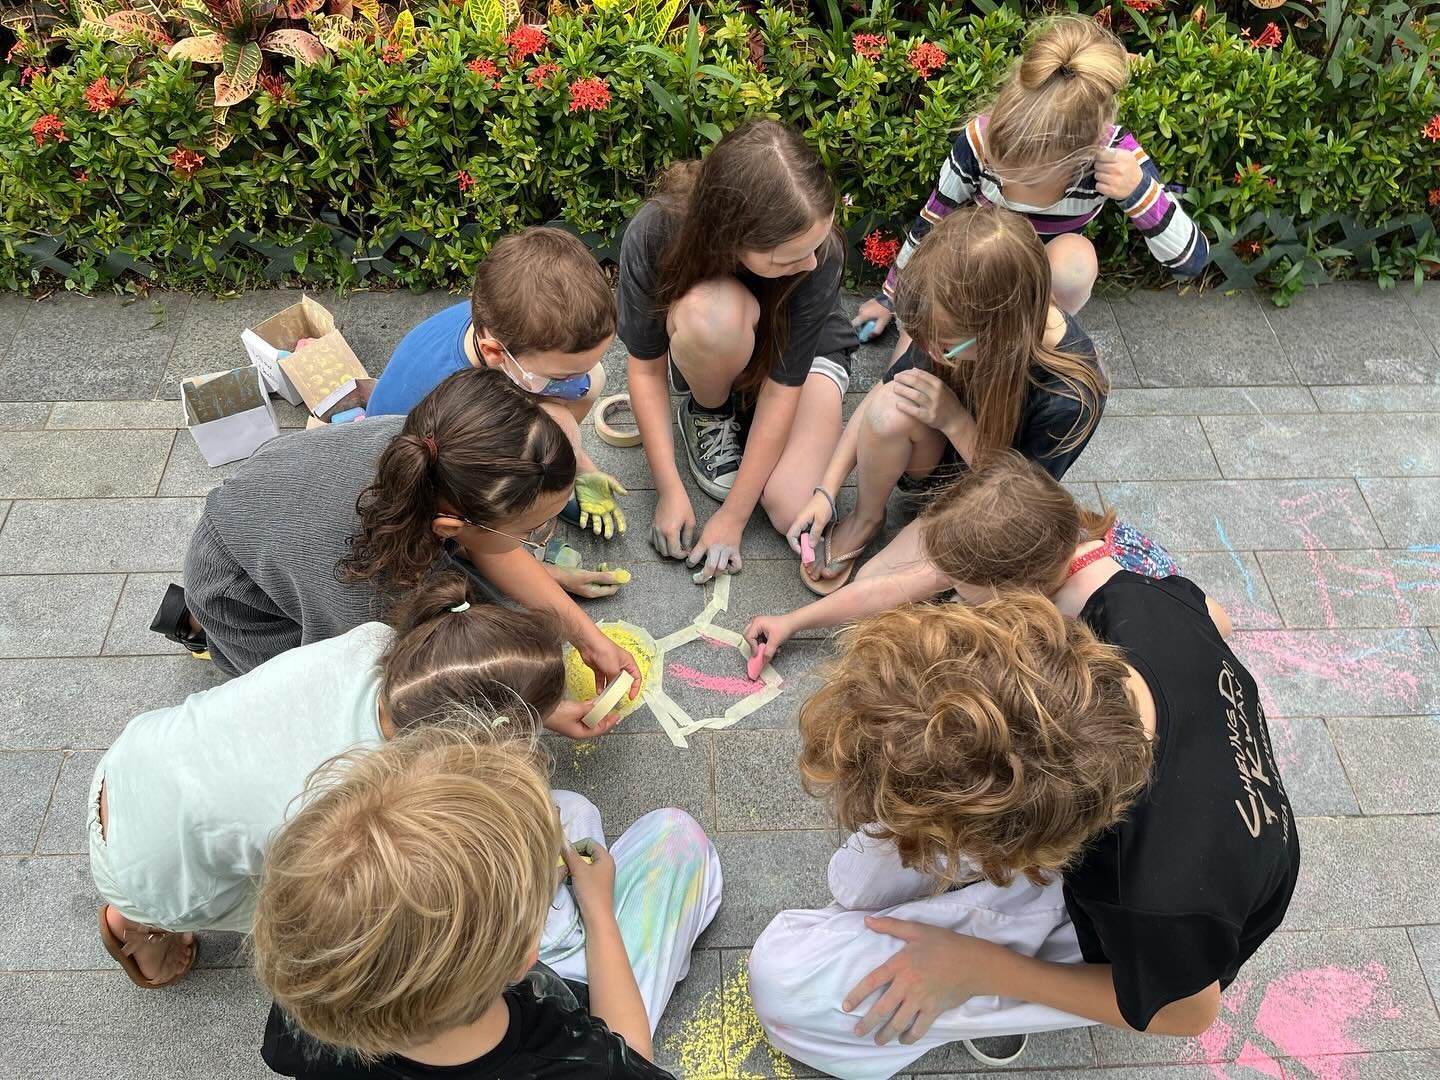 🎨 Over in Tseung Kwan O, our spirited young artists with ArtSow Academy&rsquo;s team  have taken creativity to the streets! 

Despite the rain, their giant chalk masterpiece was a vibrant splash on the block, bringing smiles and a sense of community